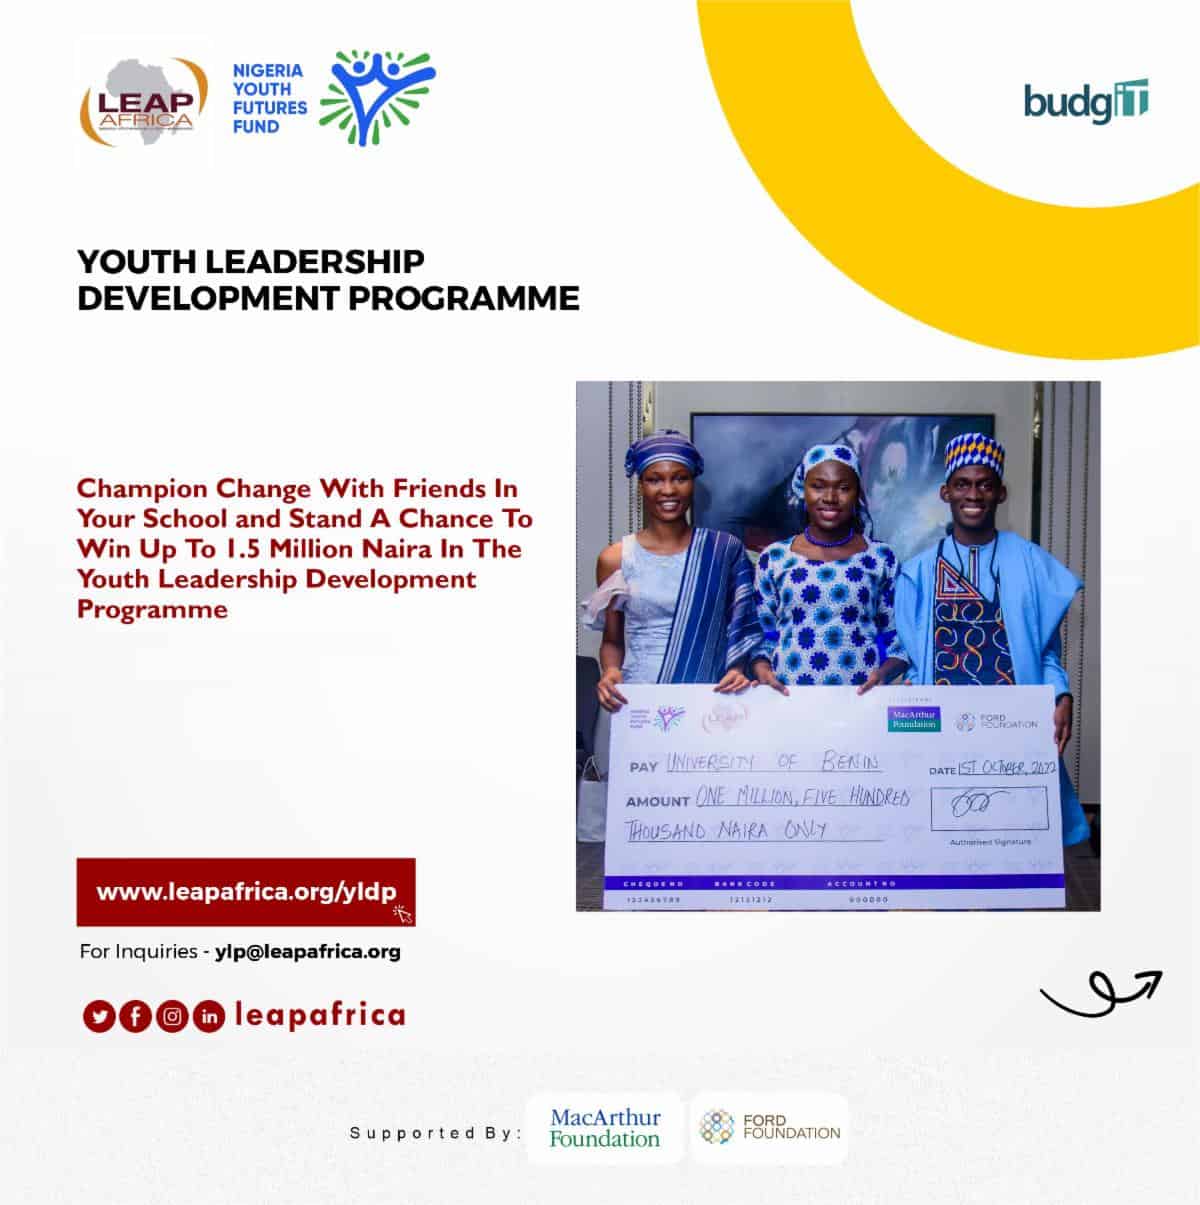 LEAP Africa Youth Leadership Programme (YLP)